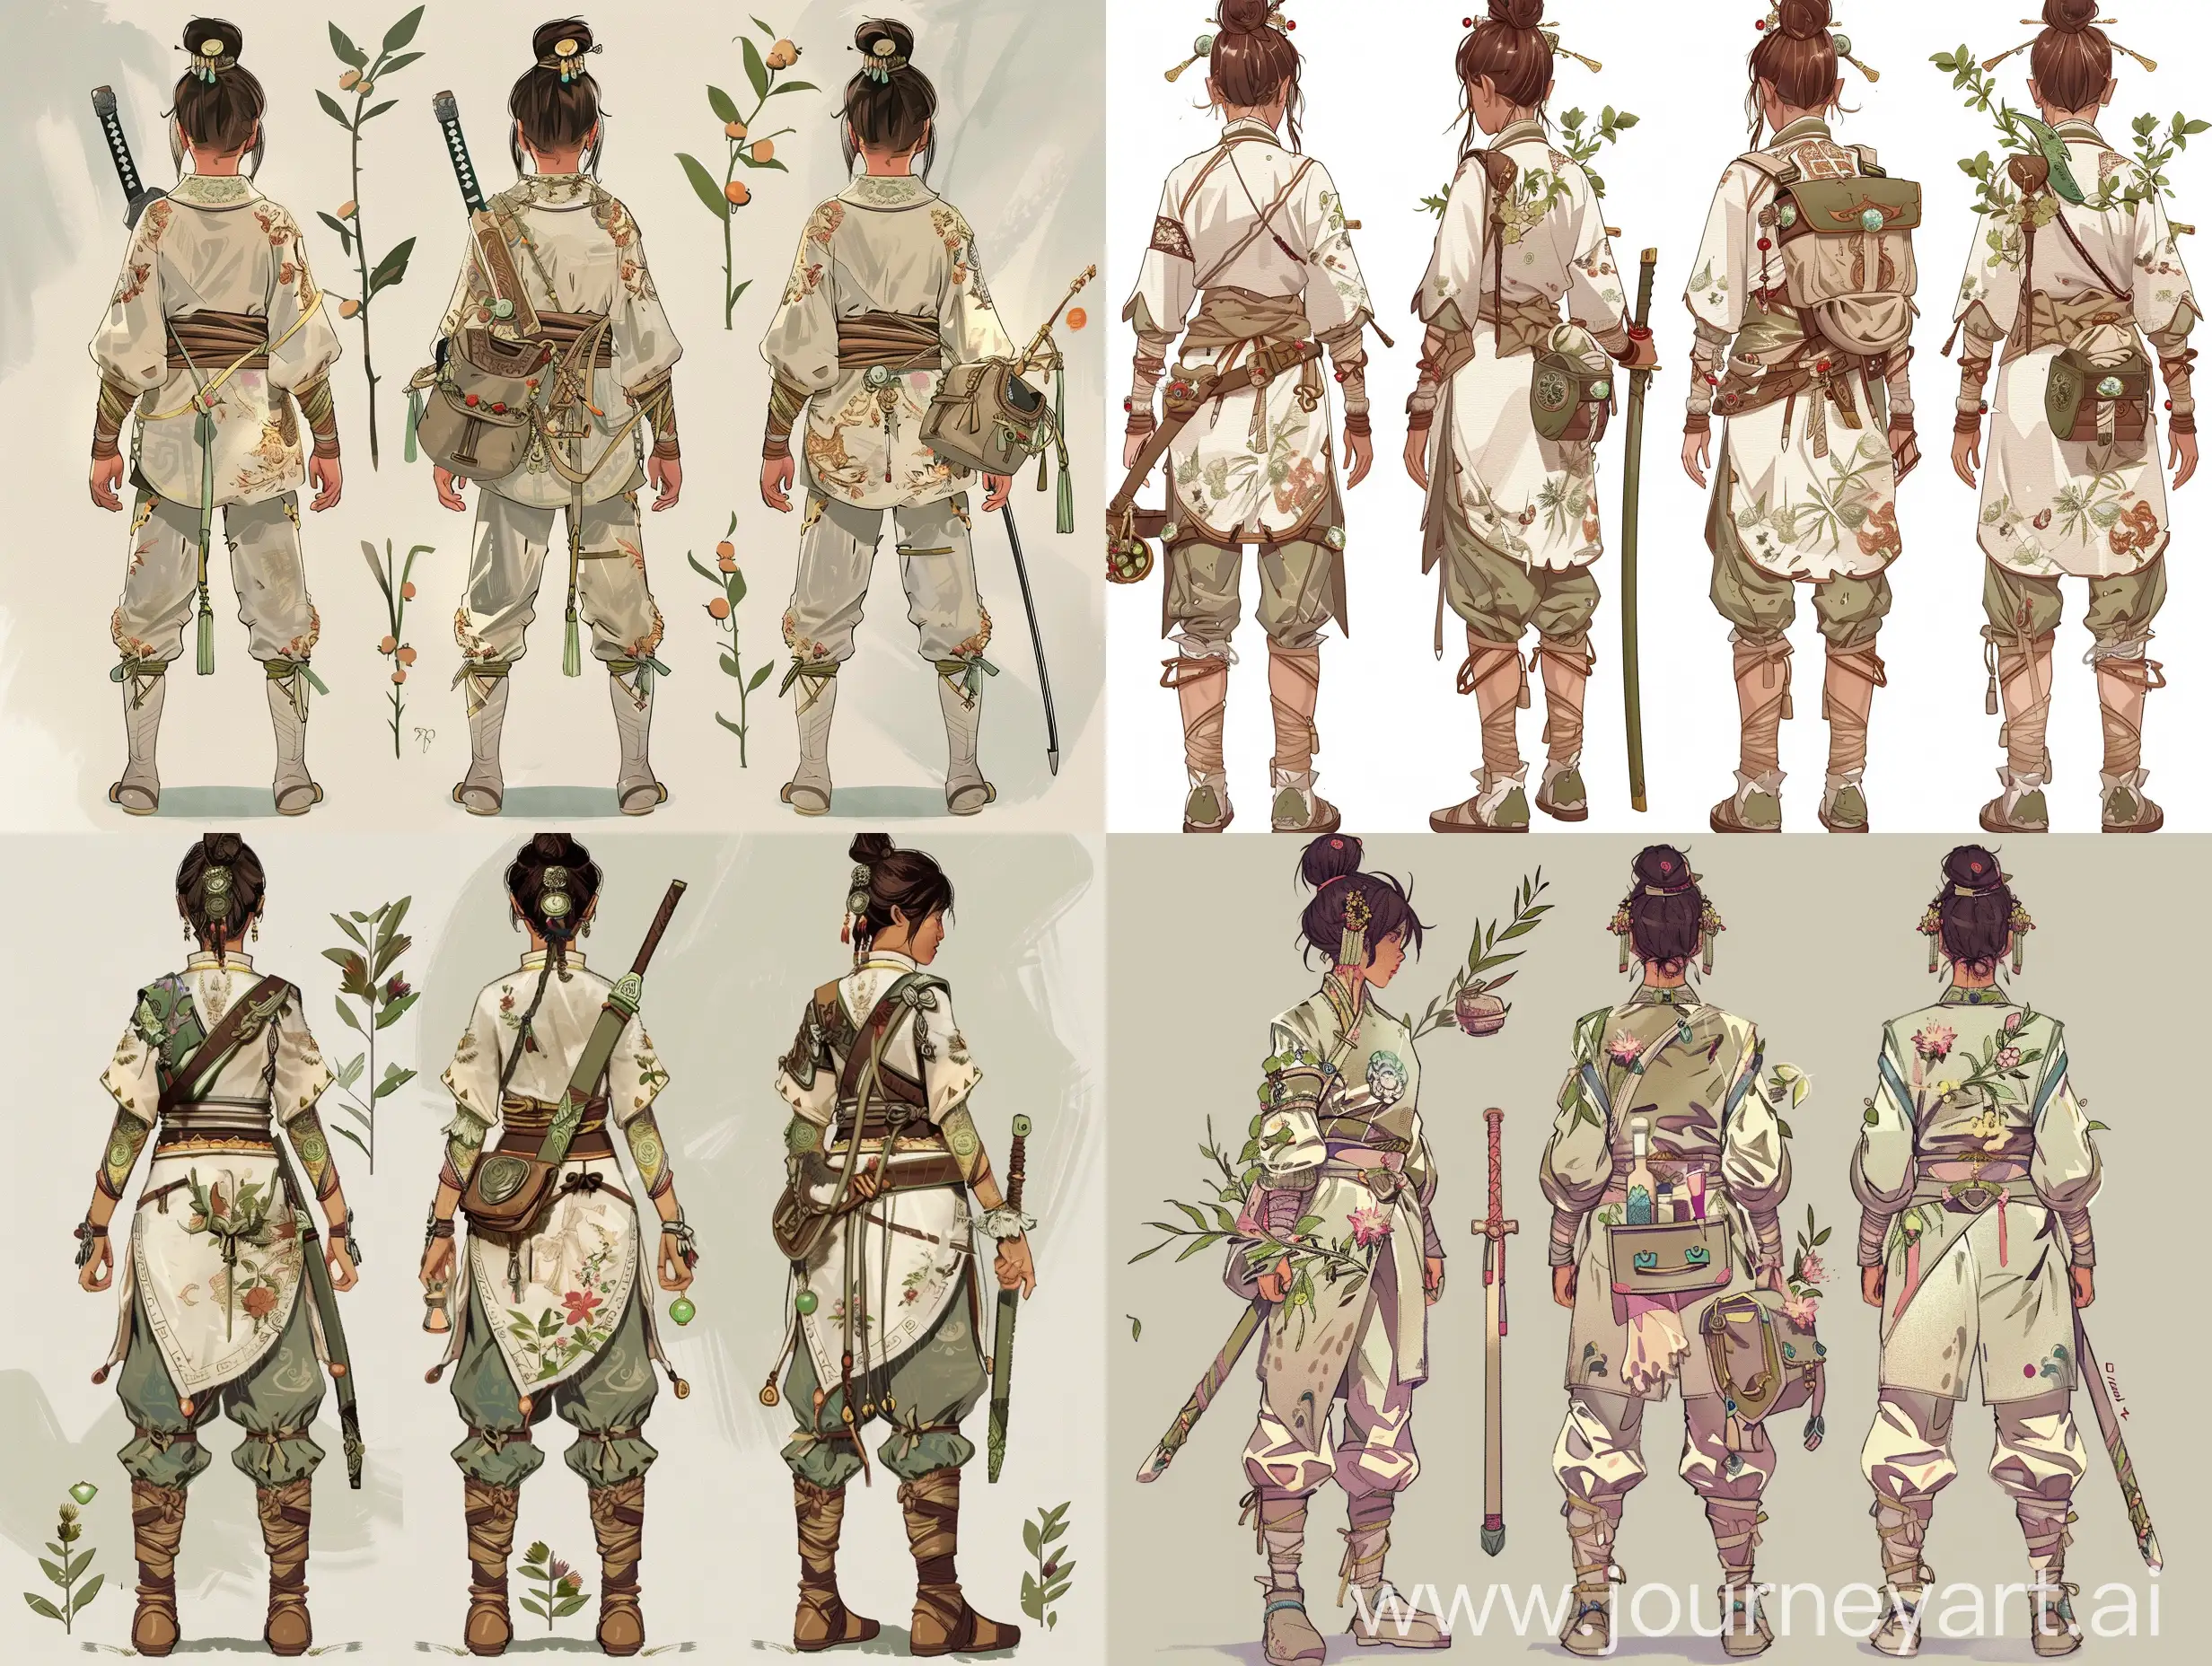 A detailed character design sheet, featuring the back, front and full body of a teen girl headstrong student from a hidden academy nestled within the East Asian jungles, who wields a short jian sword (straight double-edged sword) and carries a satchel filled with potions and herbal concoctions. She wears lightweight silk armor adorned with jade ornaments and floral embroidery. Loose-fitting pants allow for agility, and her hair is styled in a practical bun adorned with jade hairpins. Half-boots with fabric wrappings complete her look. The style is reminiscent of classic fantasy art, with a character concept emphasizing chaos